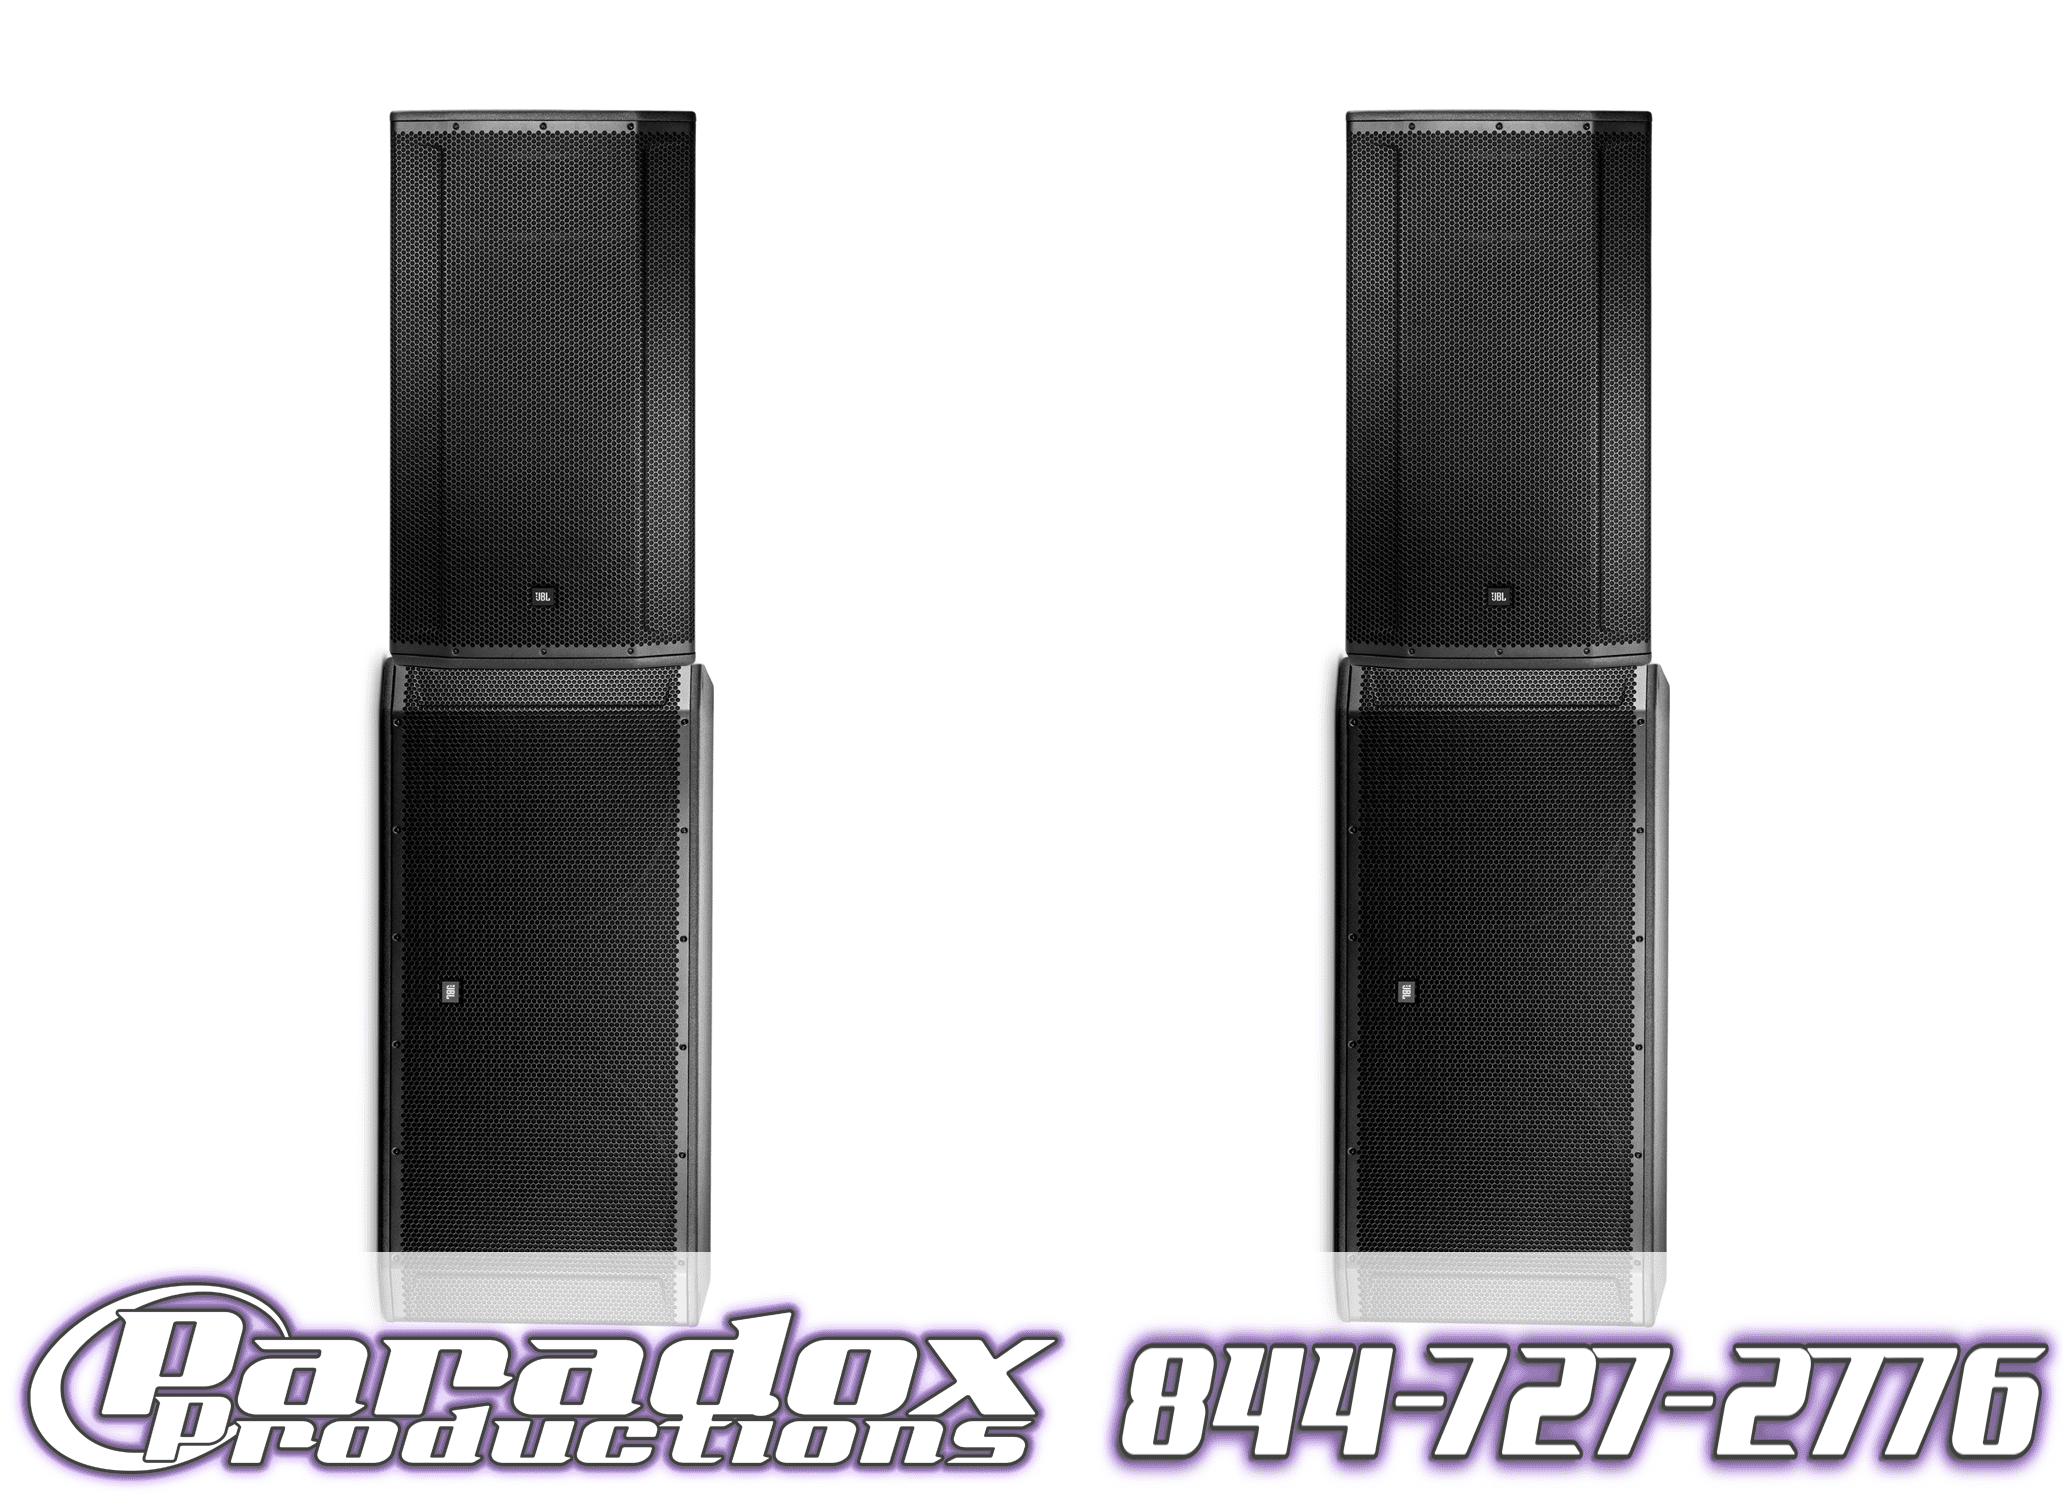 A pair of black speakers on a white background.